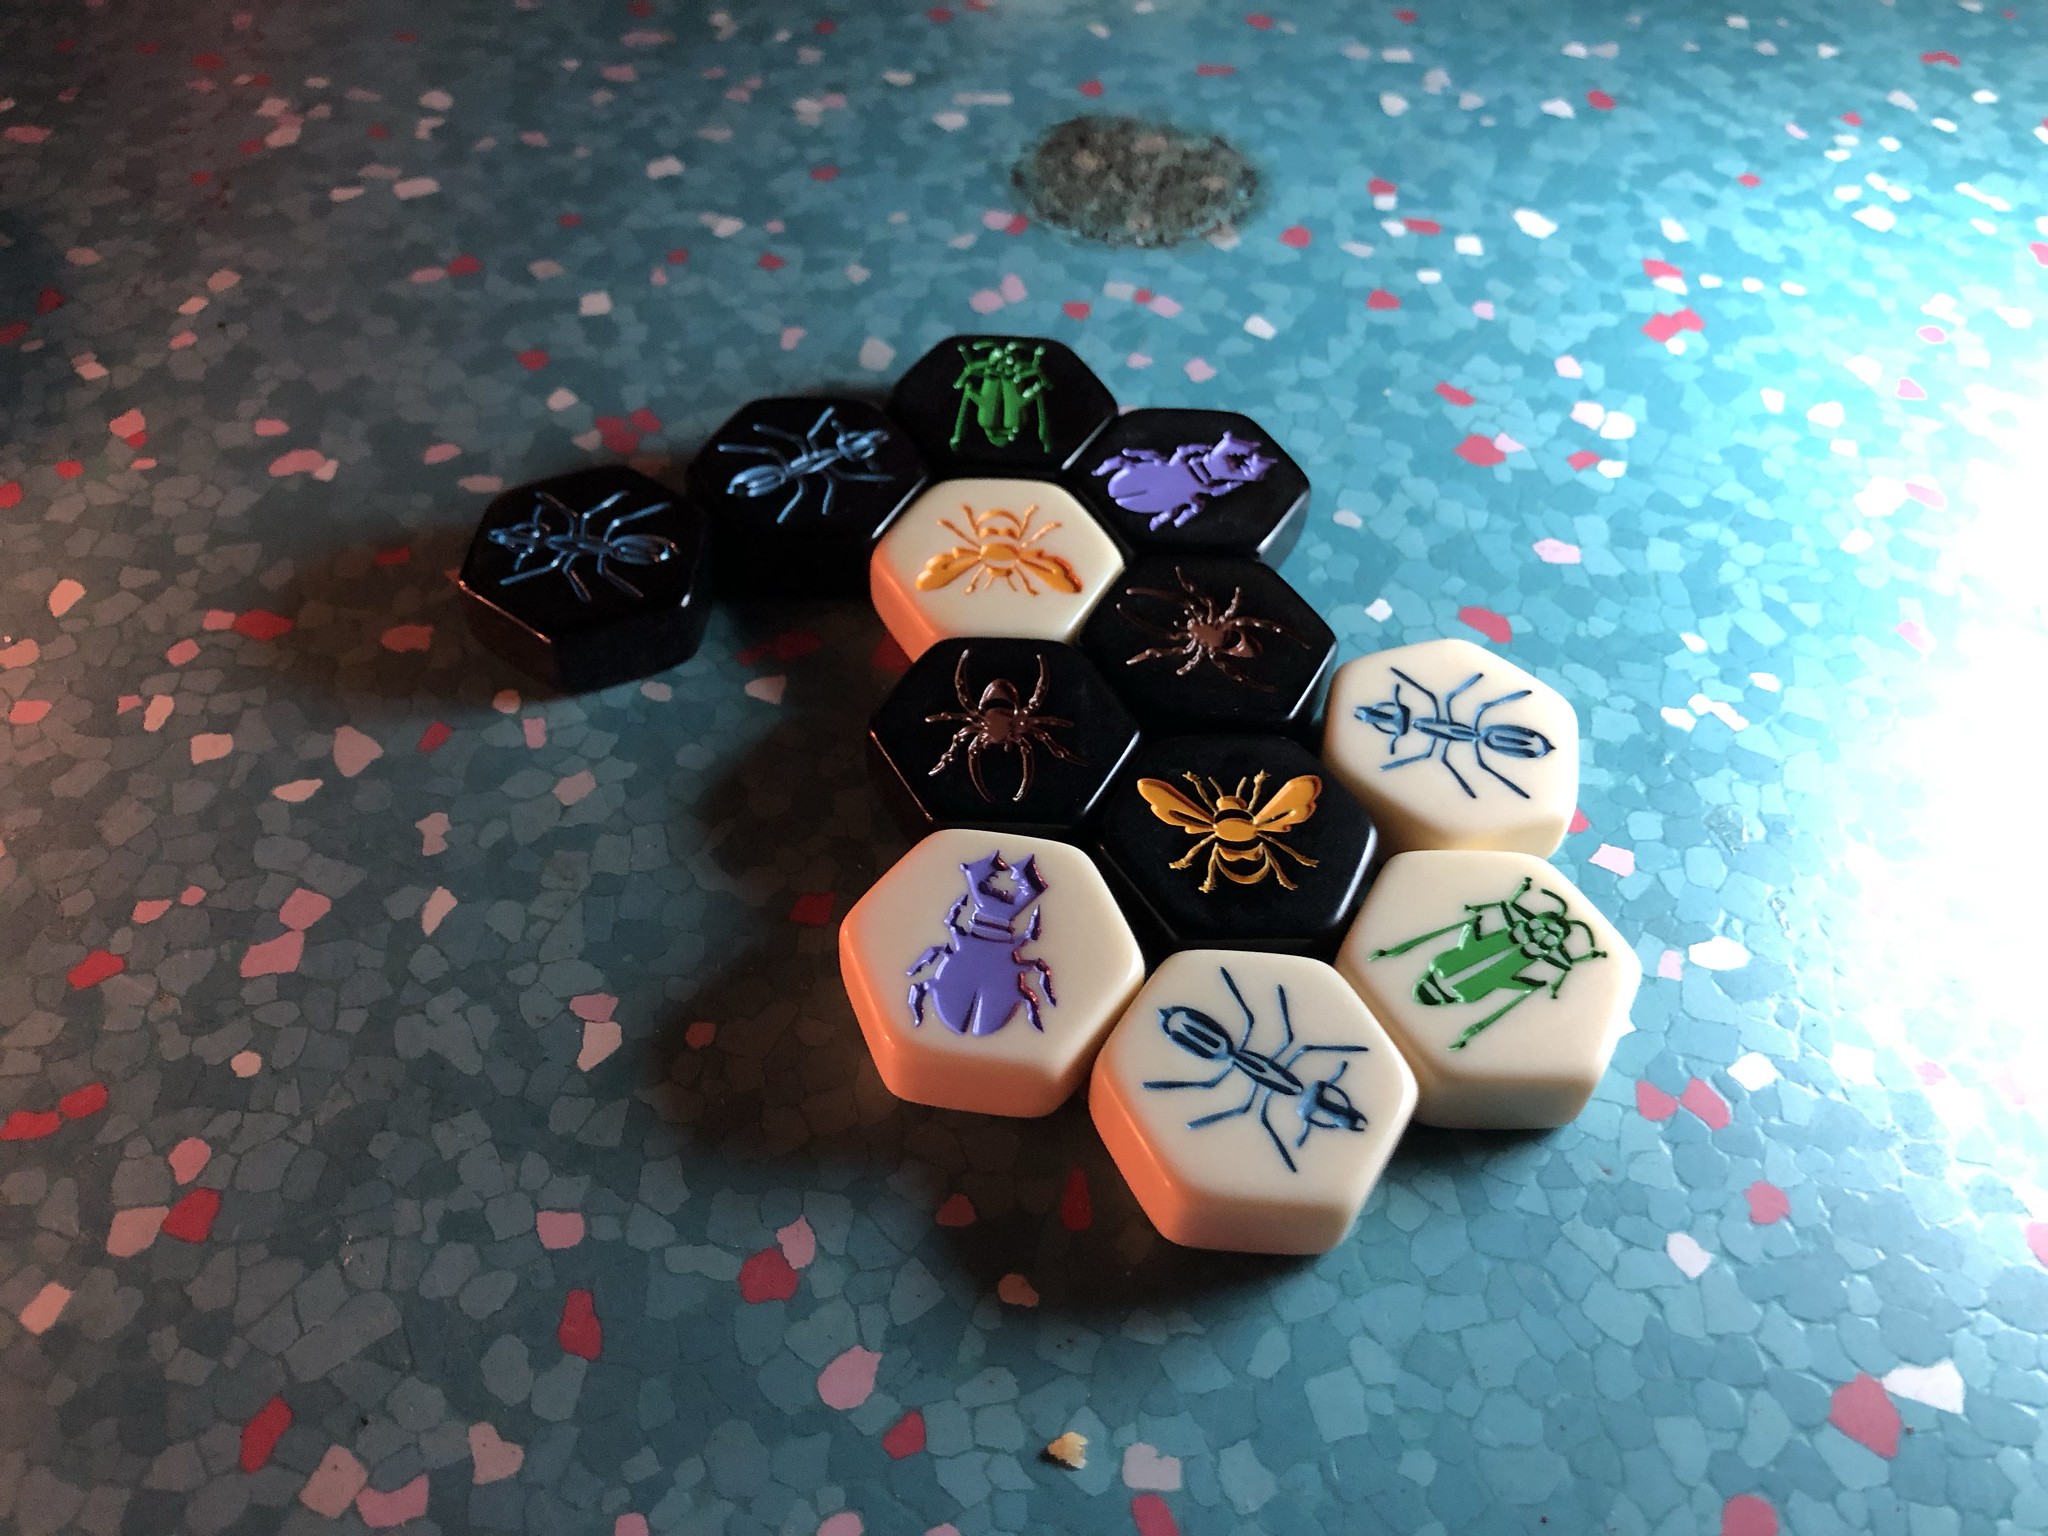 Playing Hive